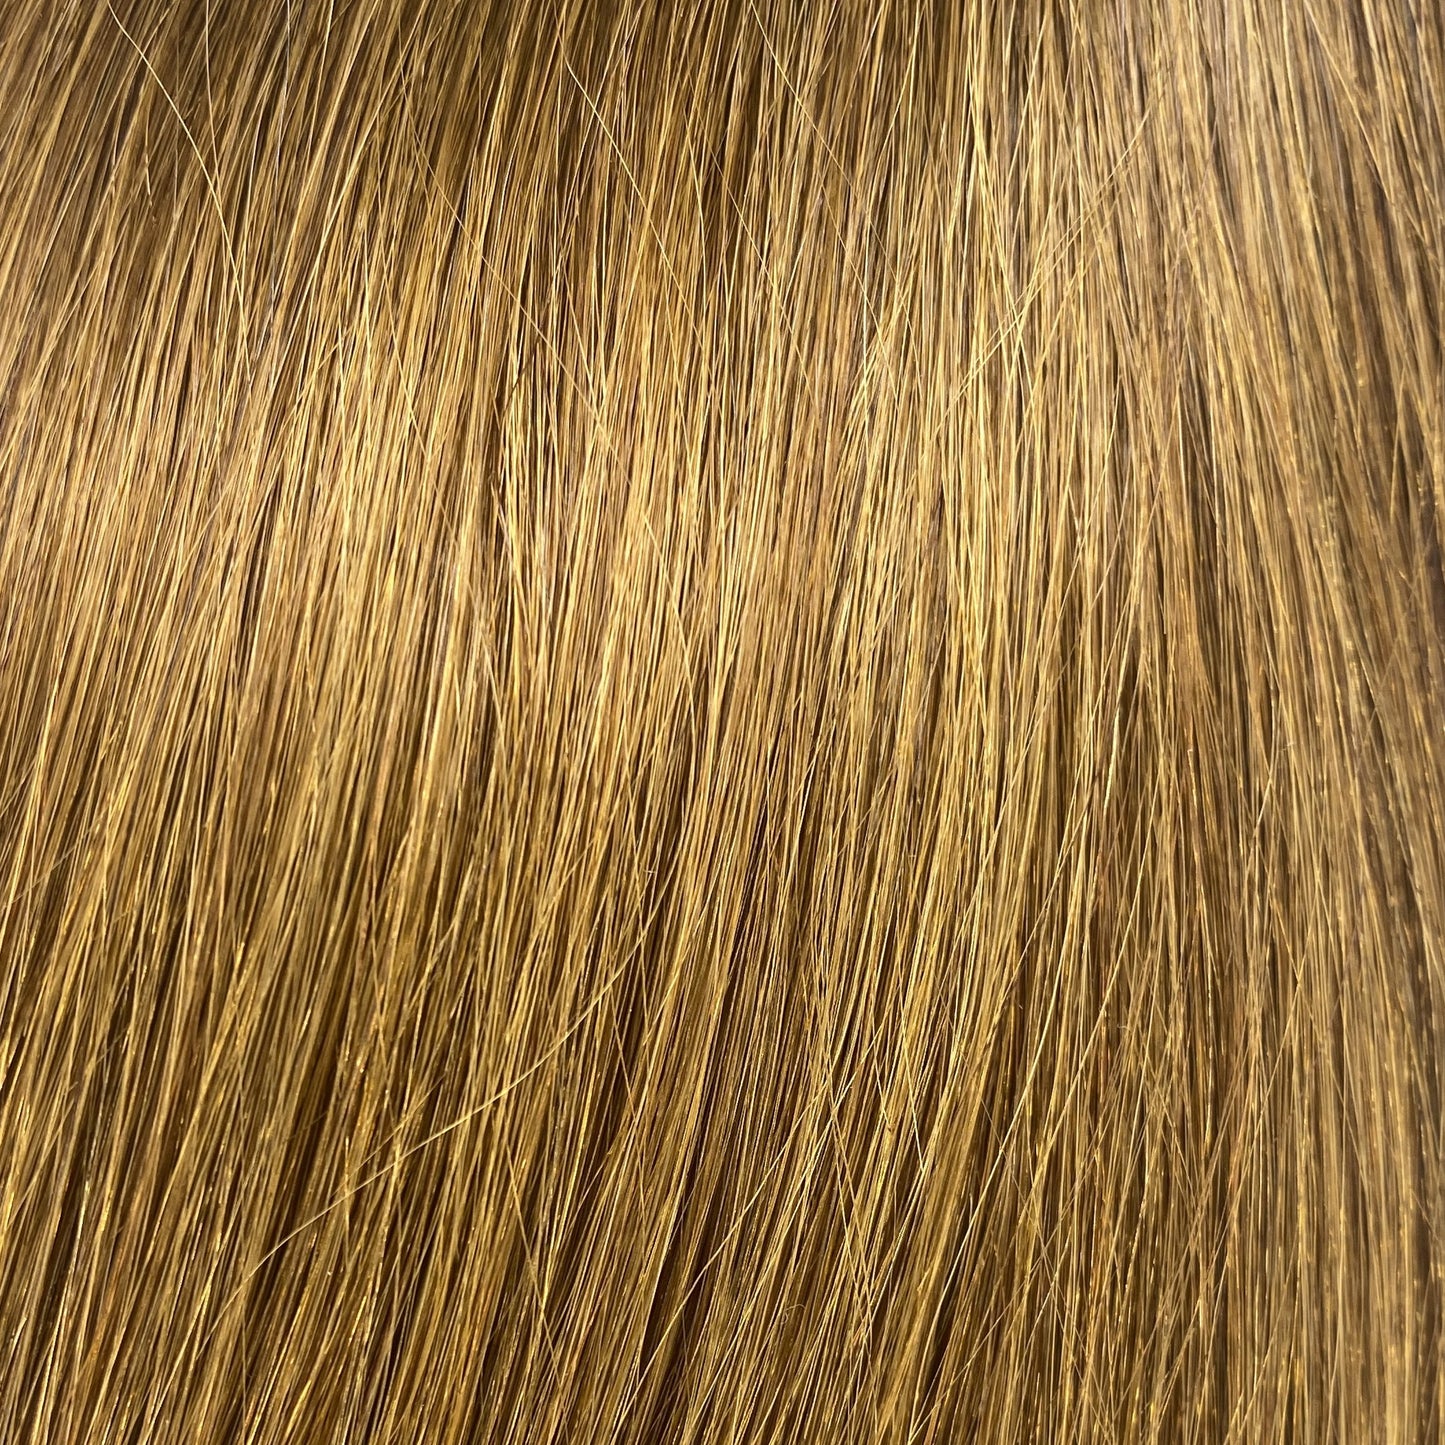 Velo #2&27 - 20 inches - Chestnut into Copper Golden Light Blonde Ombre Velo DR Hair Products Co 